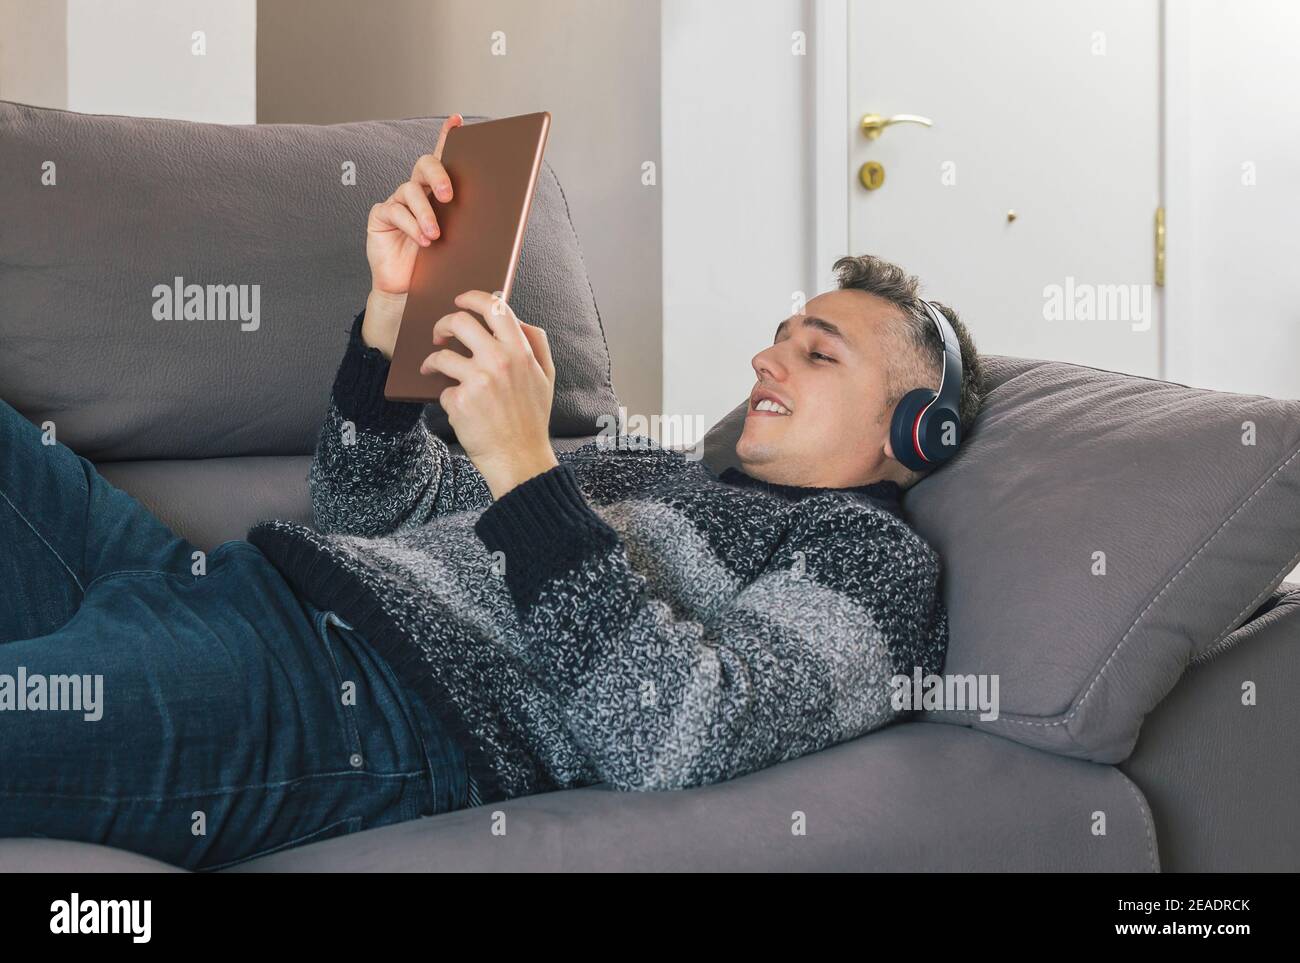 Young man lying and relaxing on the sofa while listening music and using a tablet. Guy having great time at home concept Stock Photo